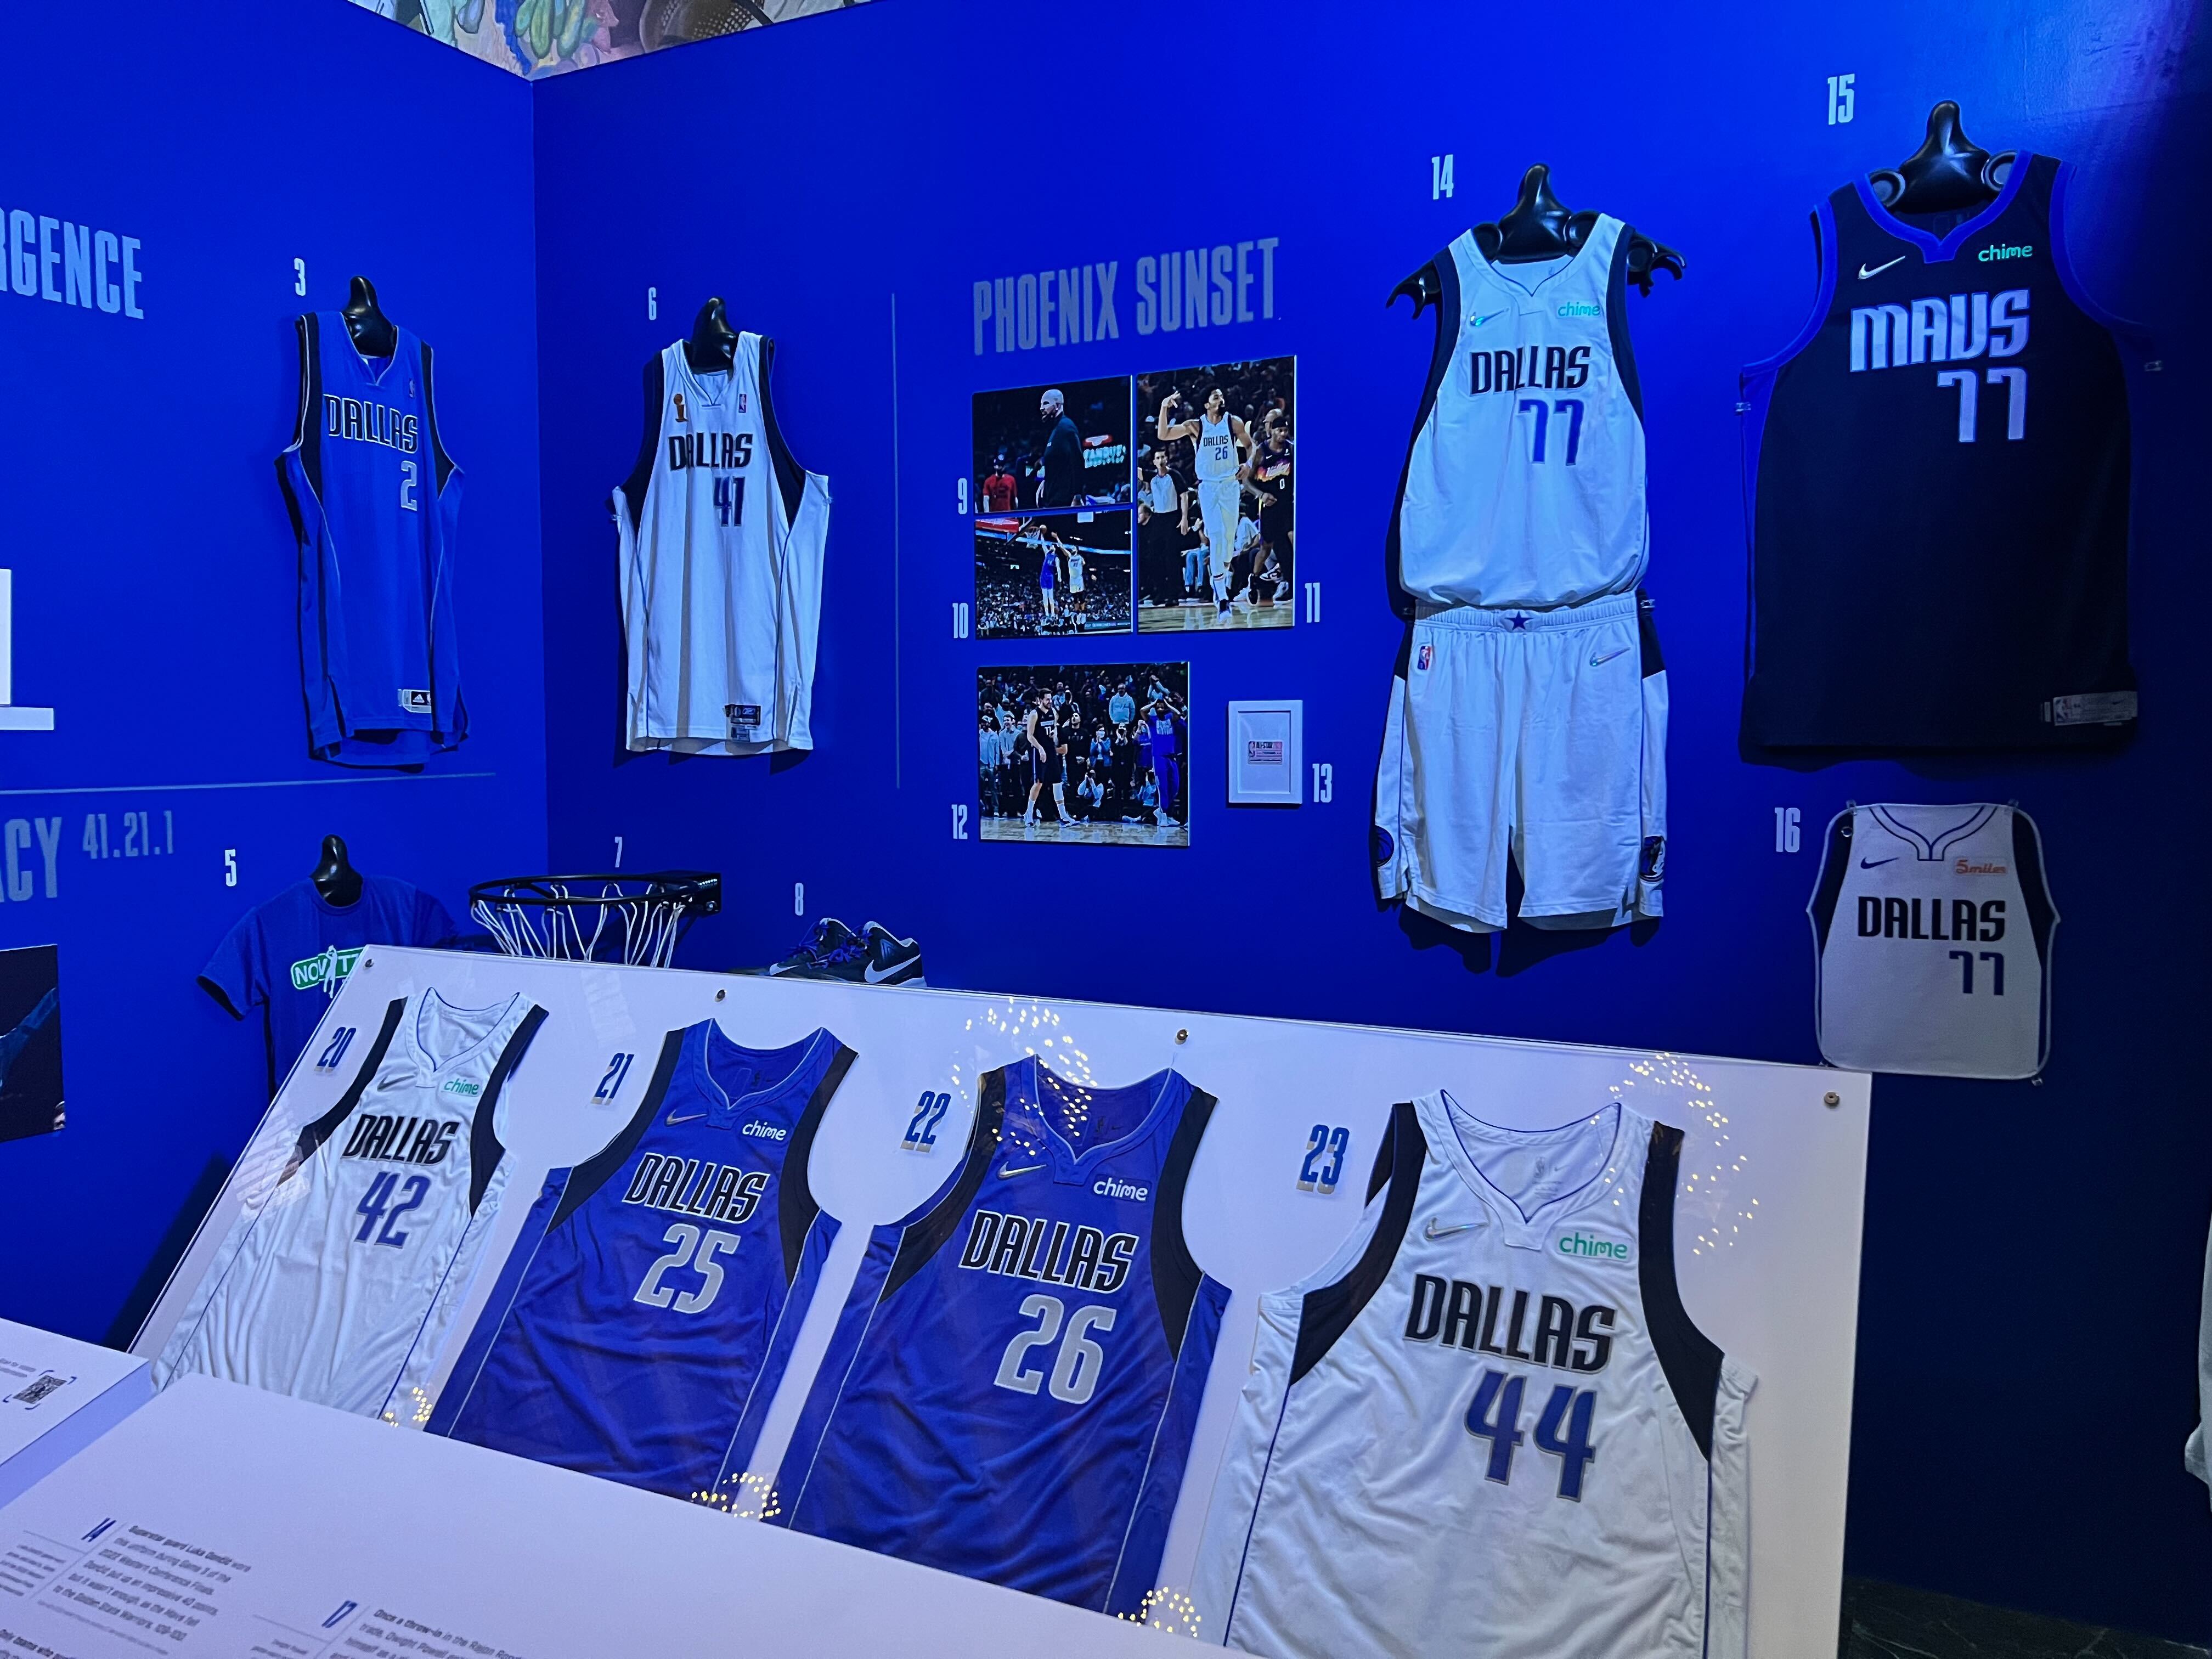 Dallas Mavericks, Dirk Nowitzki NBA champs team signed jersey signed w –  Awesome Artifacts